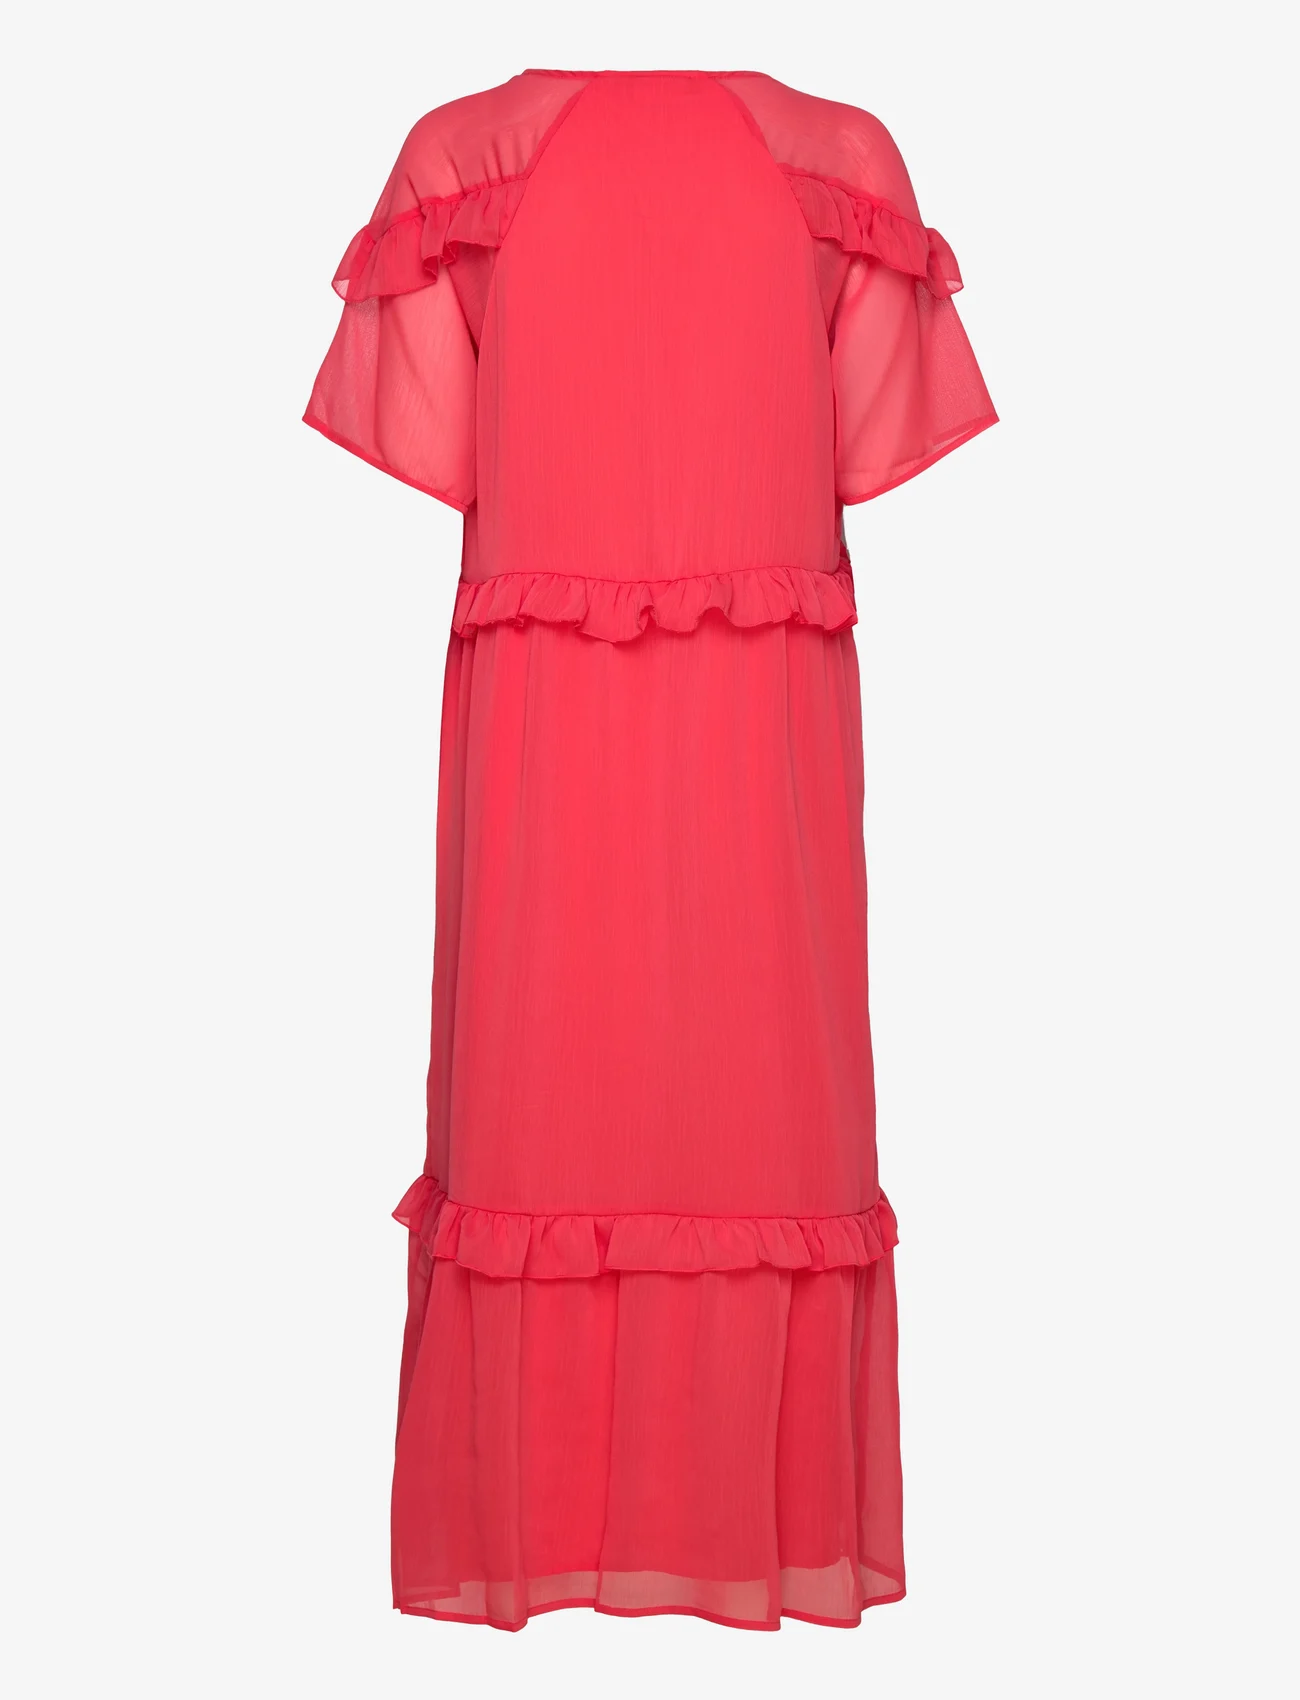 Coster Copenhagen - Long dress with frills - juhlamuotia outlet-hintaan - coral pink - 1